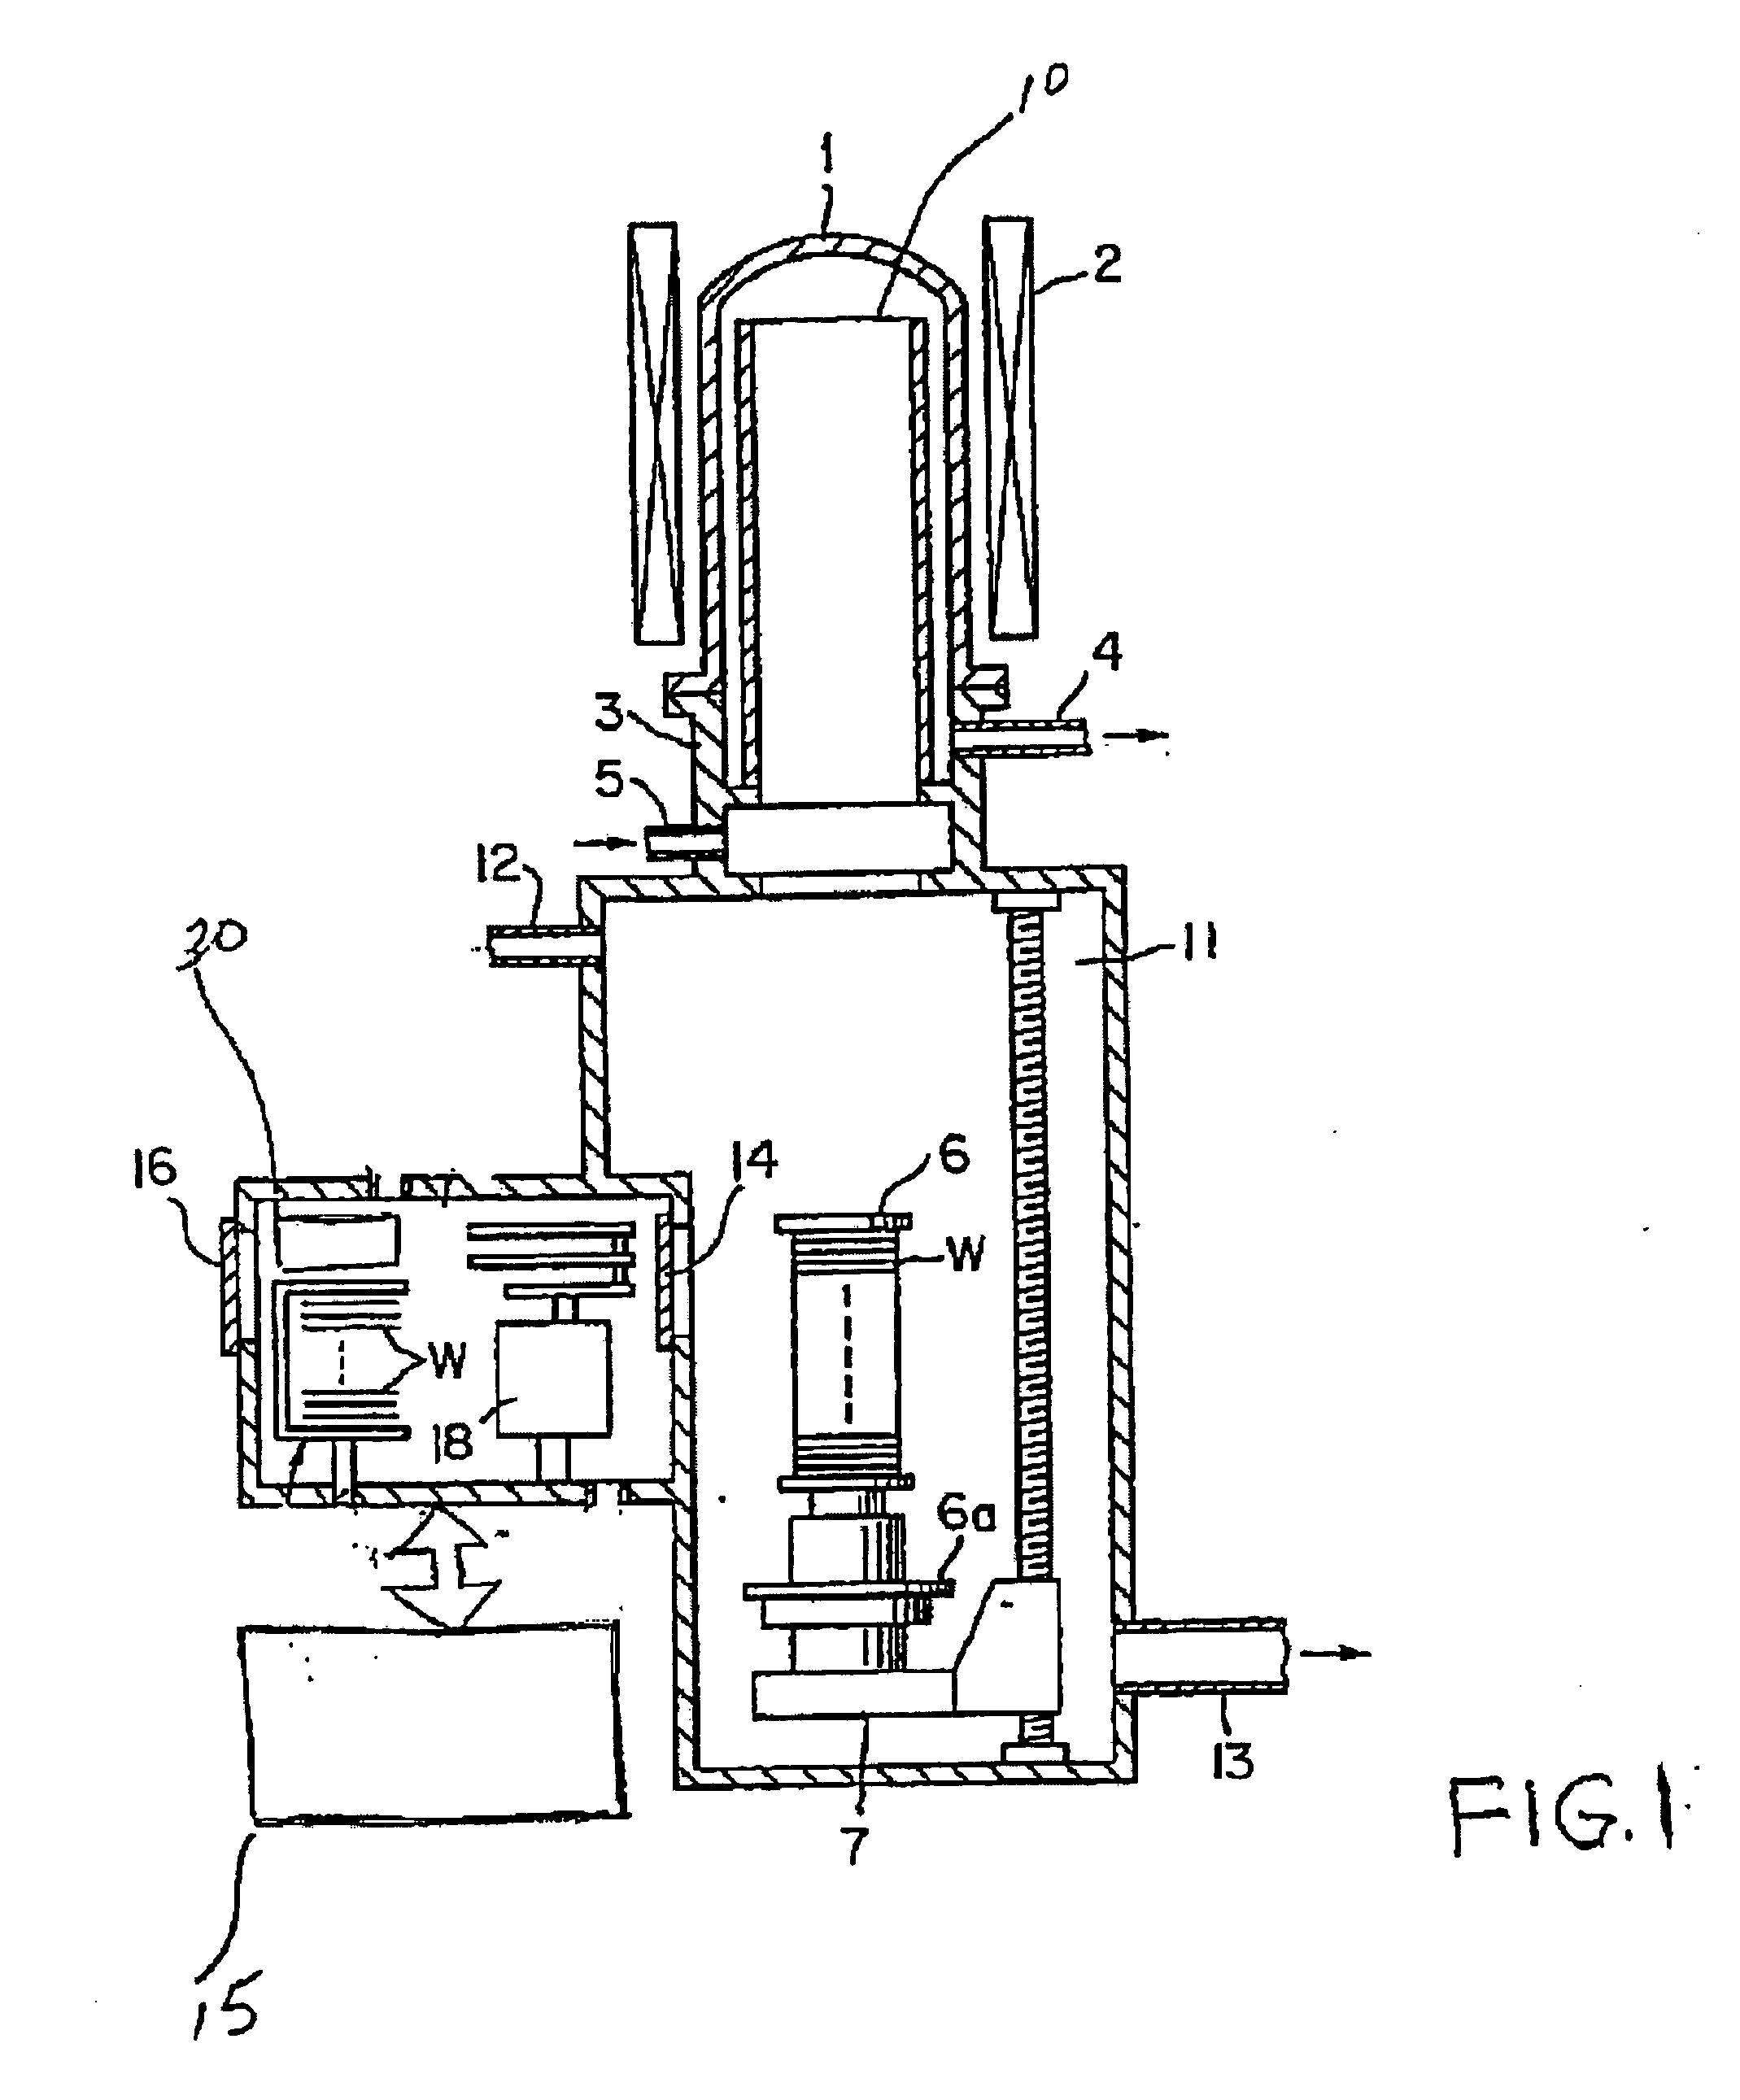 Intelligent full automation controlled flow for a semiconductor furnace tool